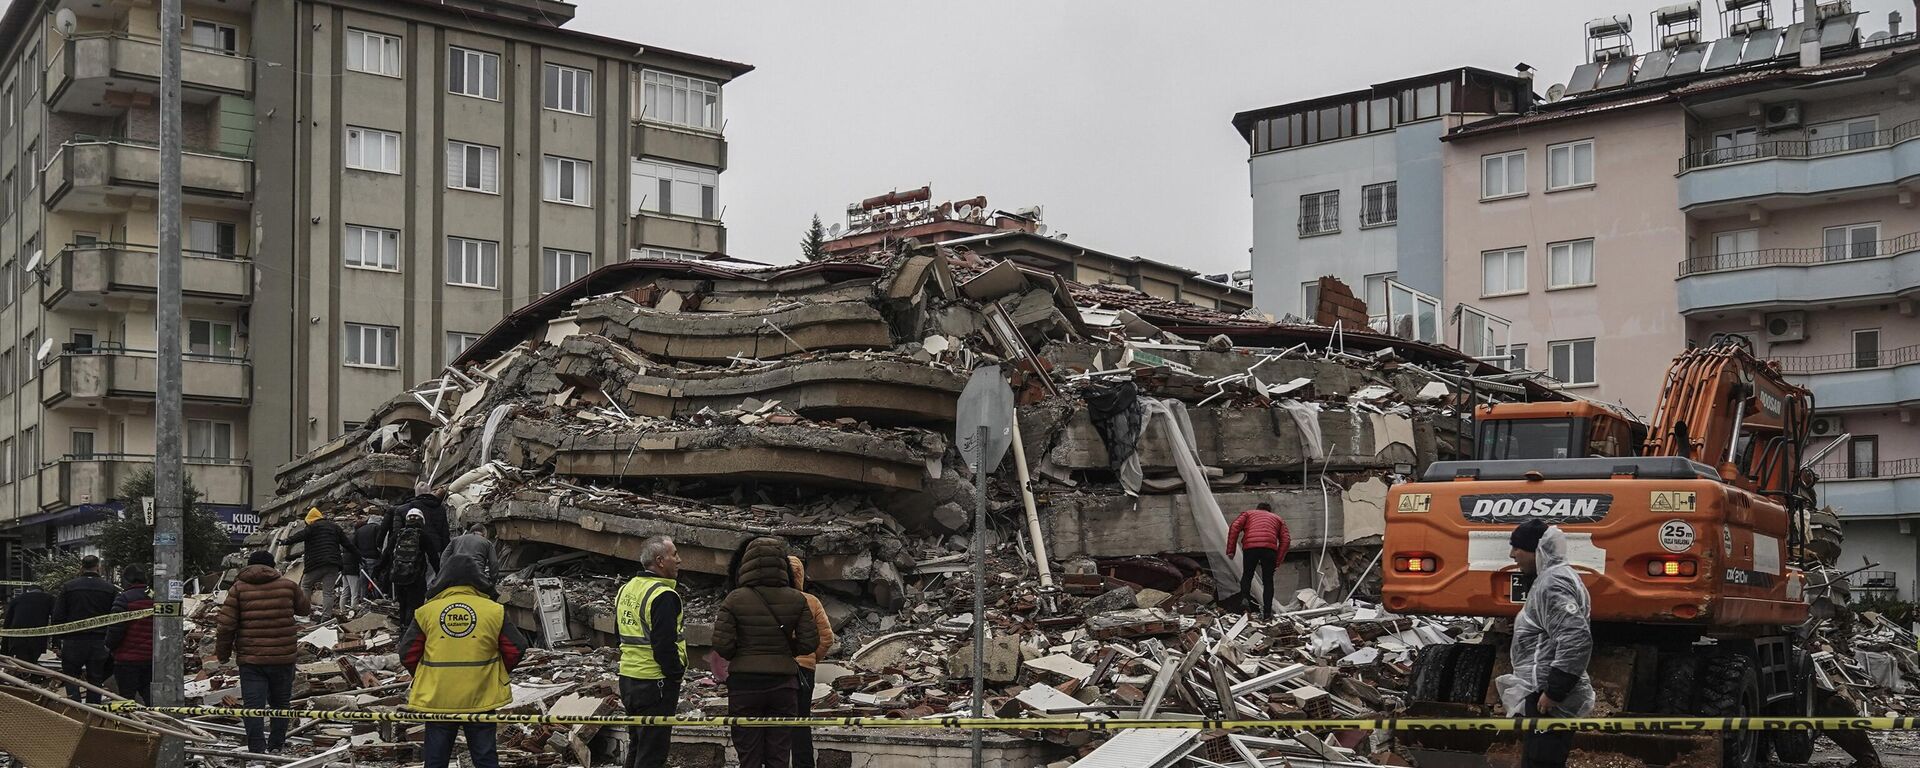 Emergency teams search for people in the rubble of a destroyed building in Gaziantep, Turkey, Monday, Feb. 6, 2023. A powerful quake has knocked down multiple buildings in southeast Turkey and Syria and many casualties are feared. - Sputnik International, 1920, 06.02.2023